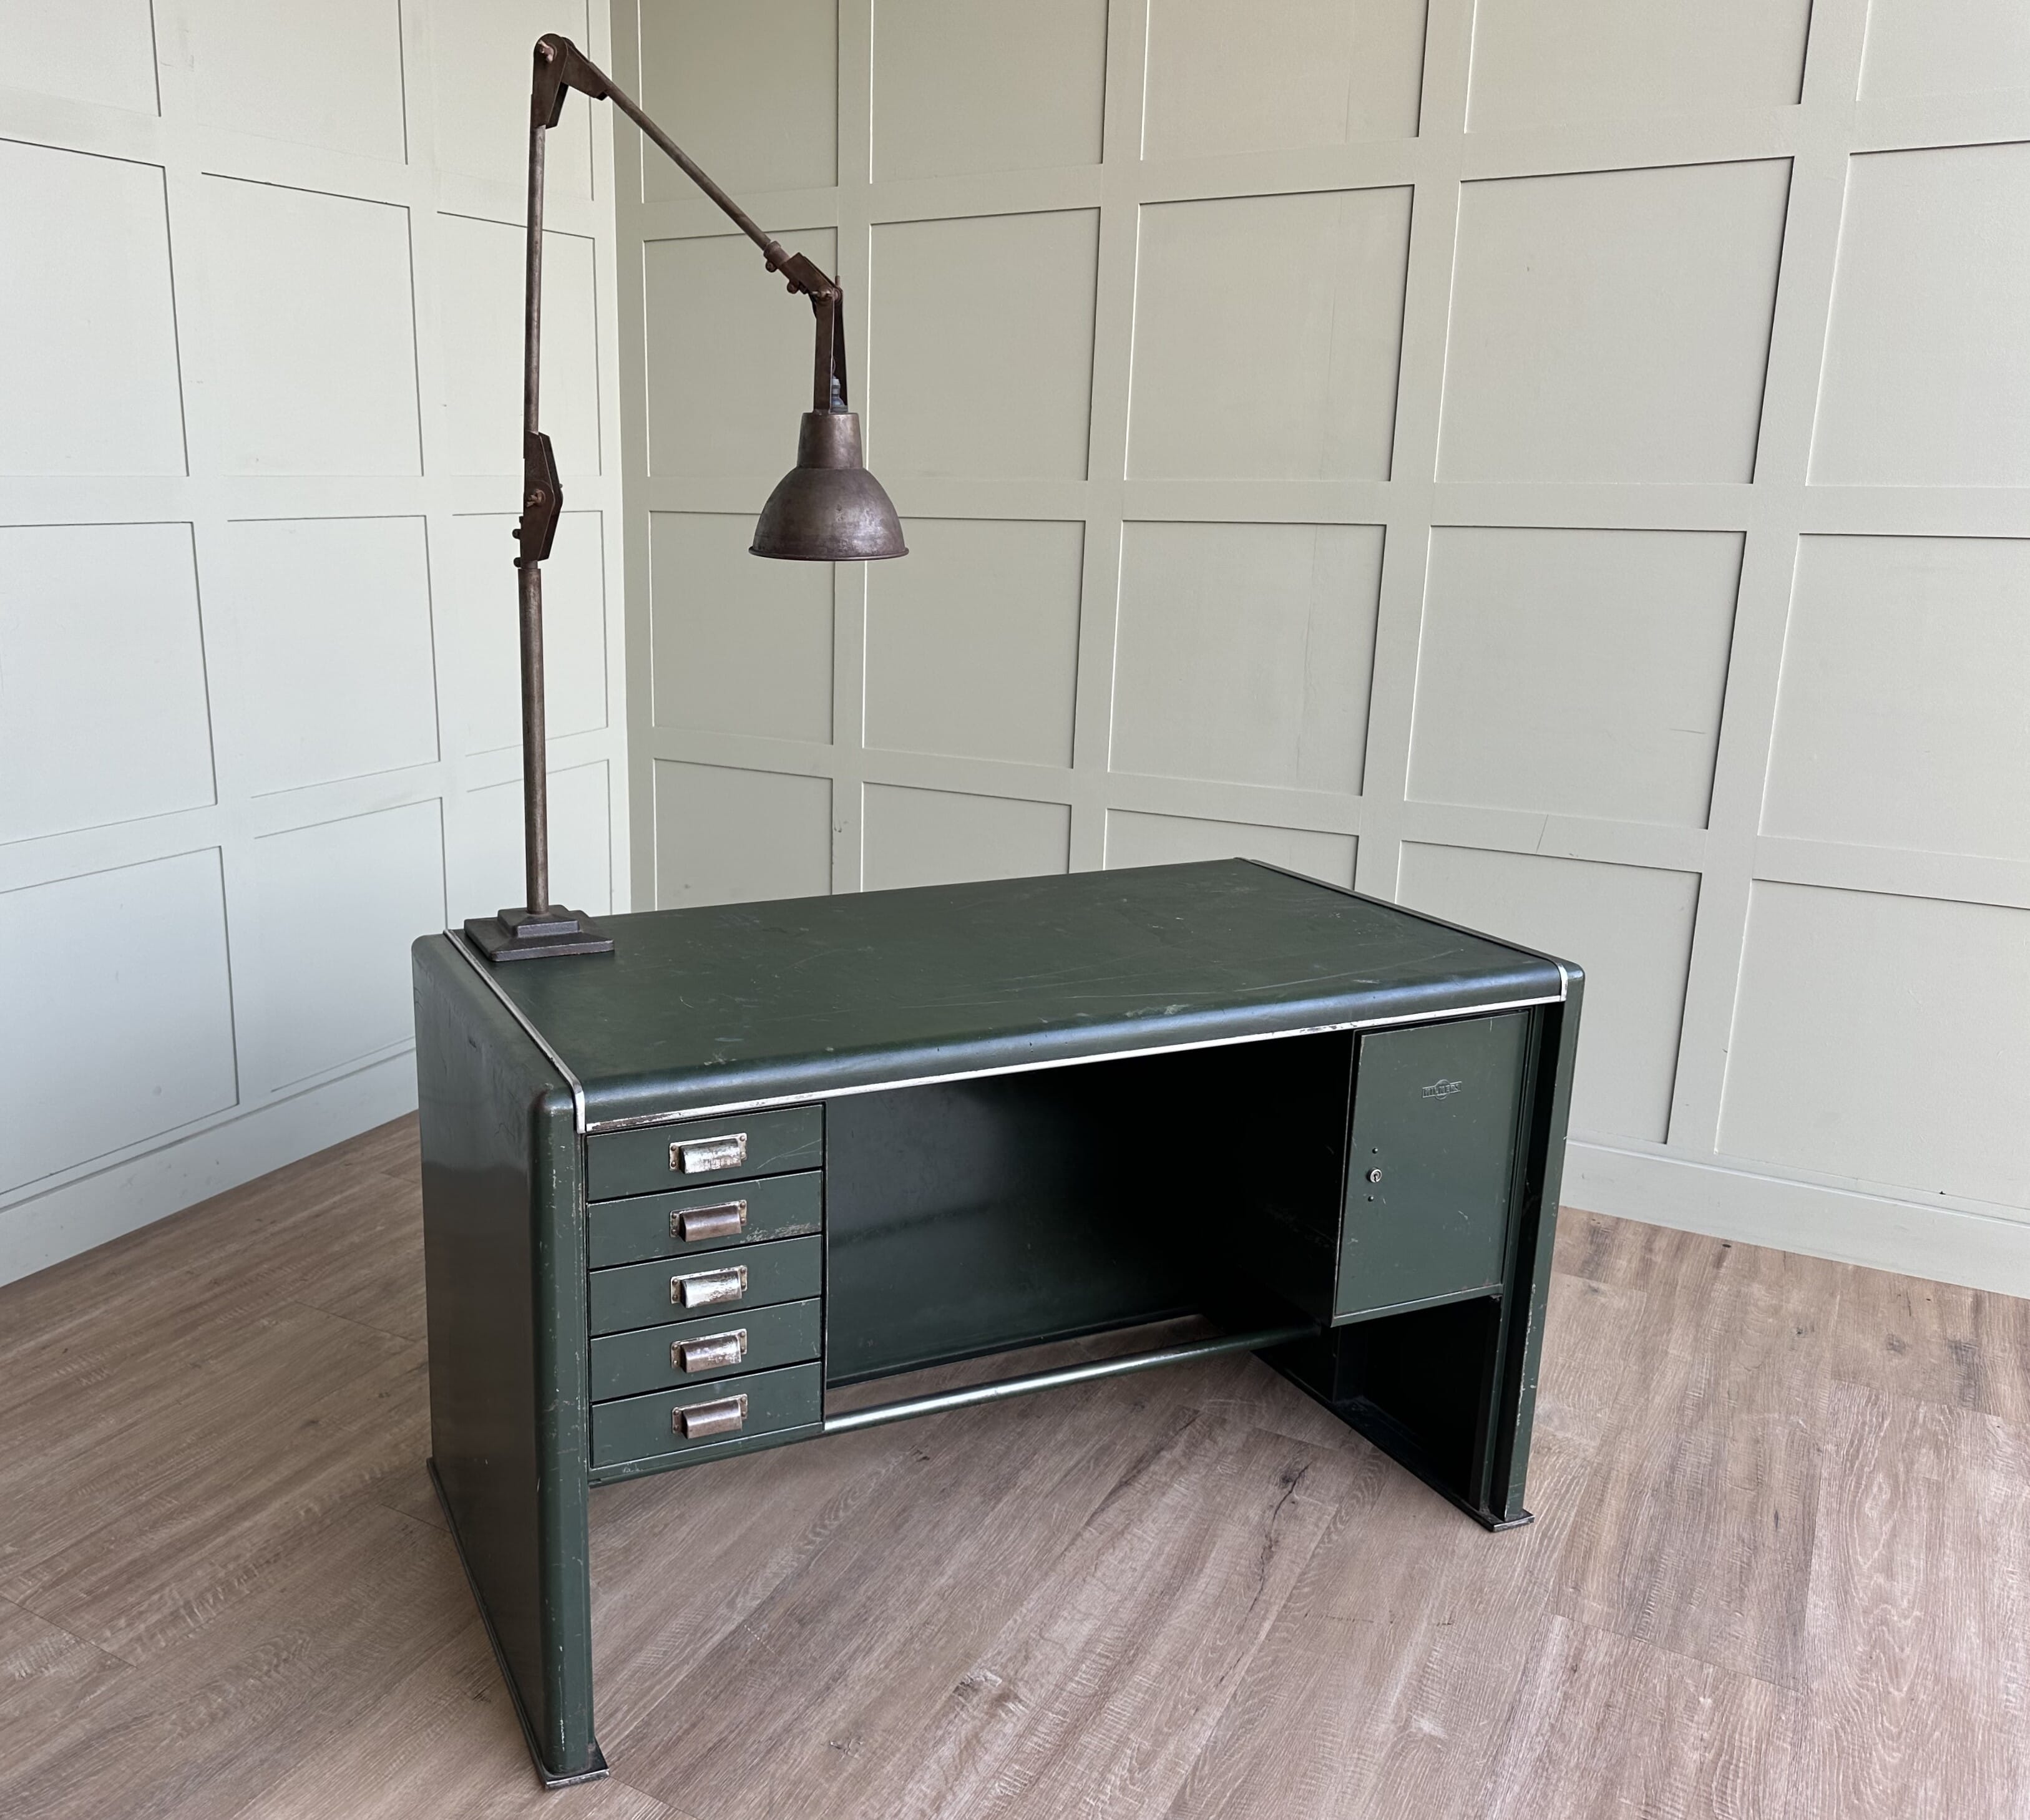 UKAA Have For Sale Vintage Milner Desk With Fitted Lamp